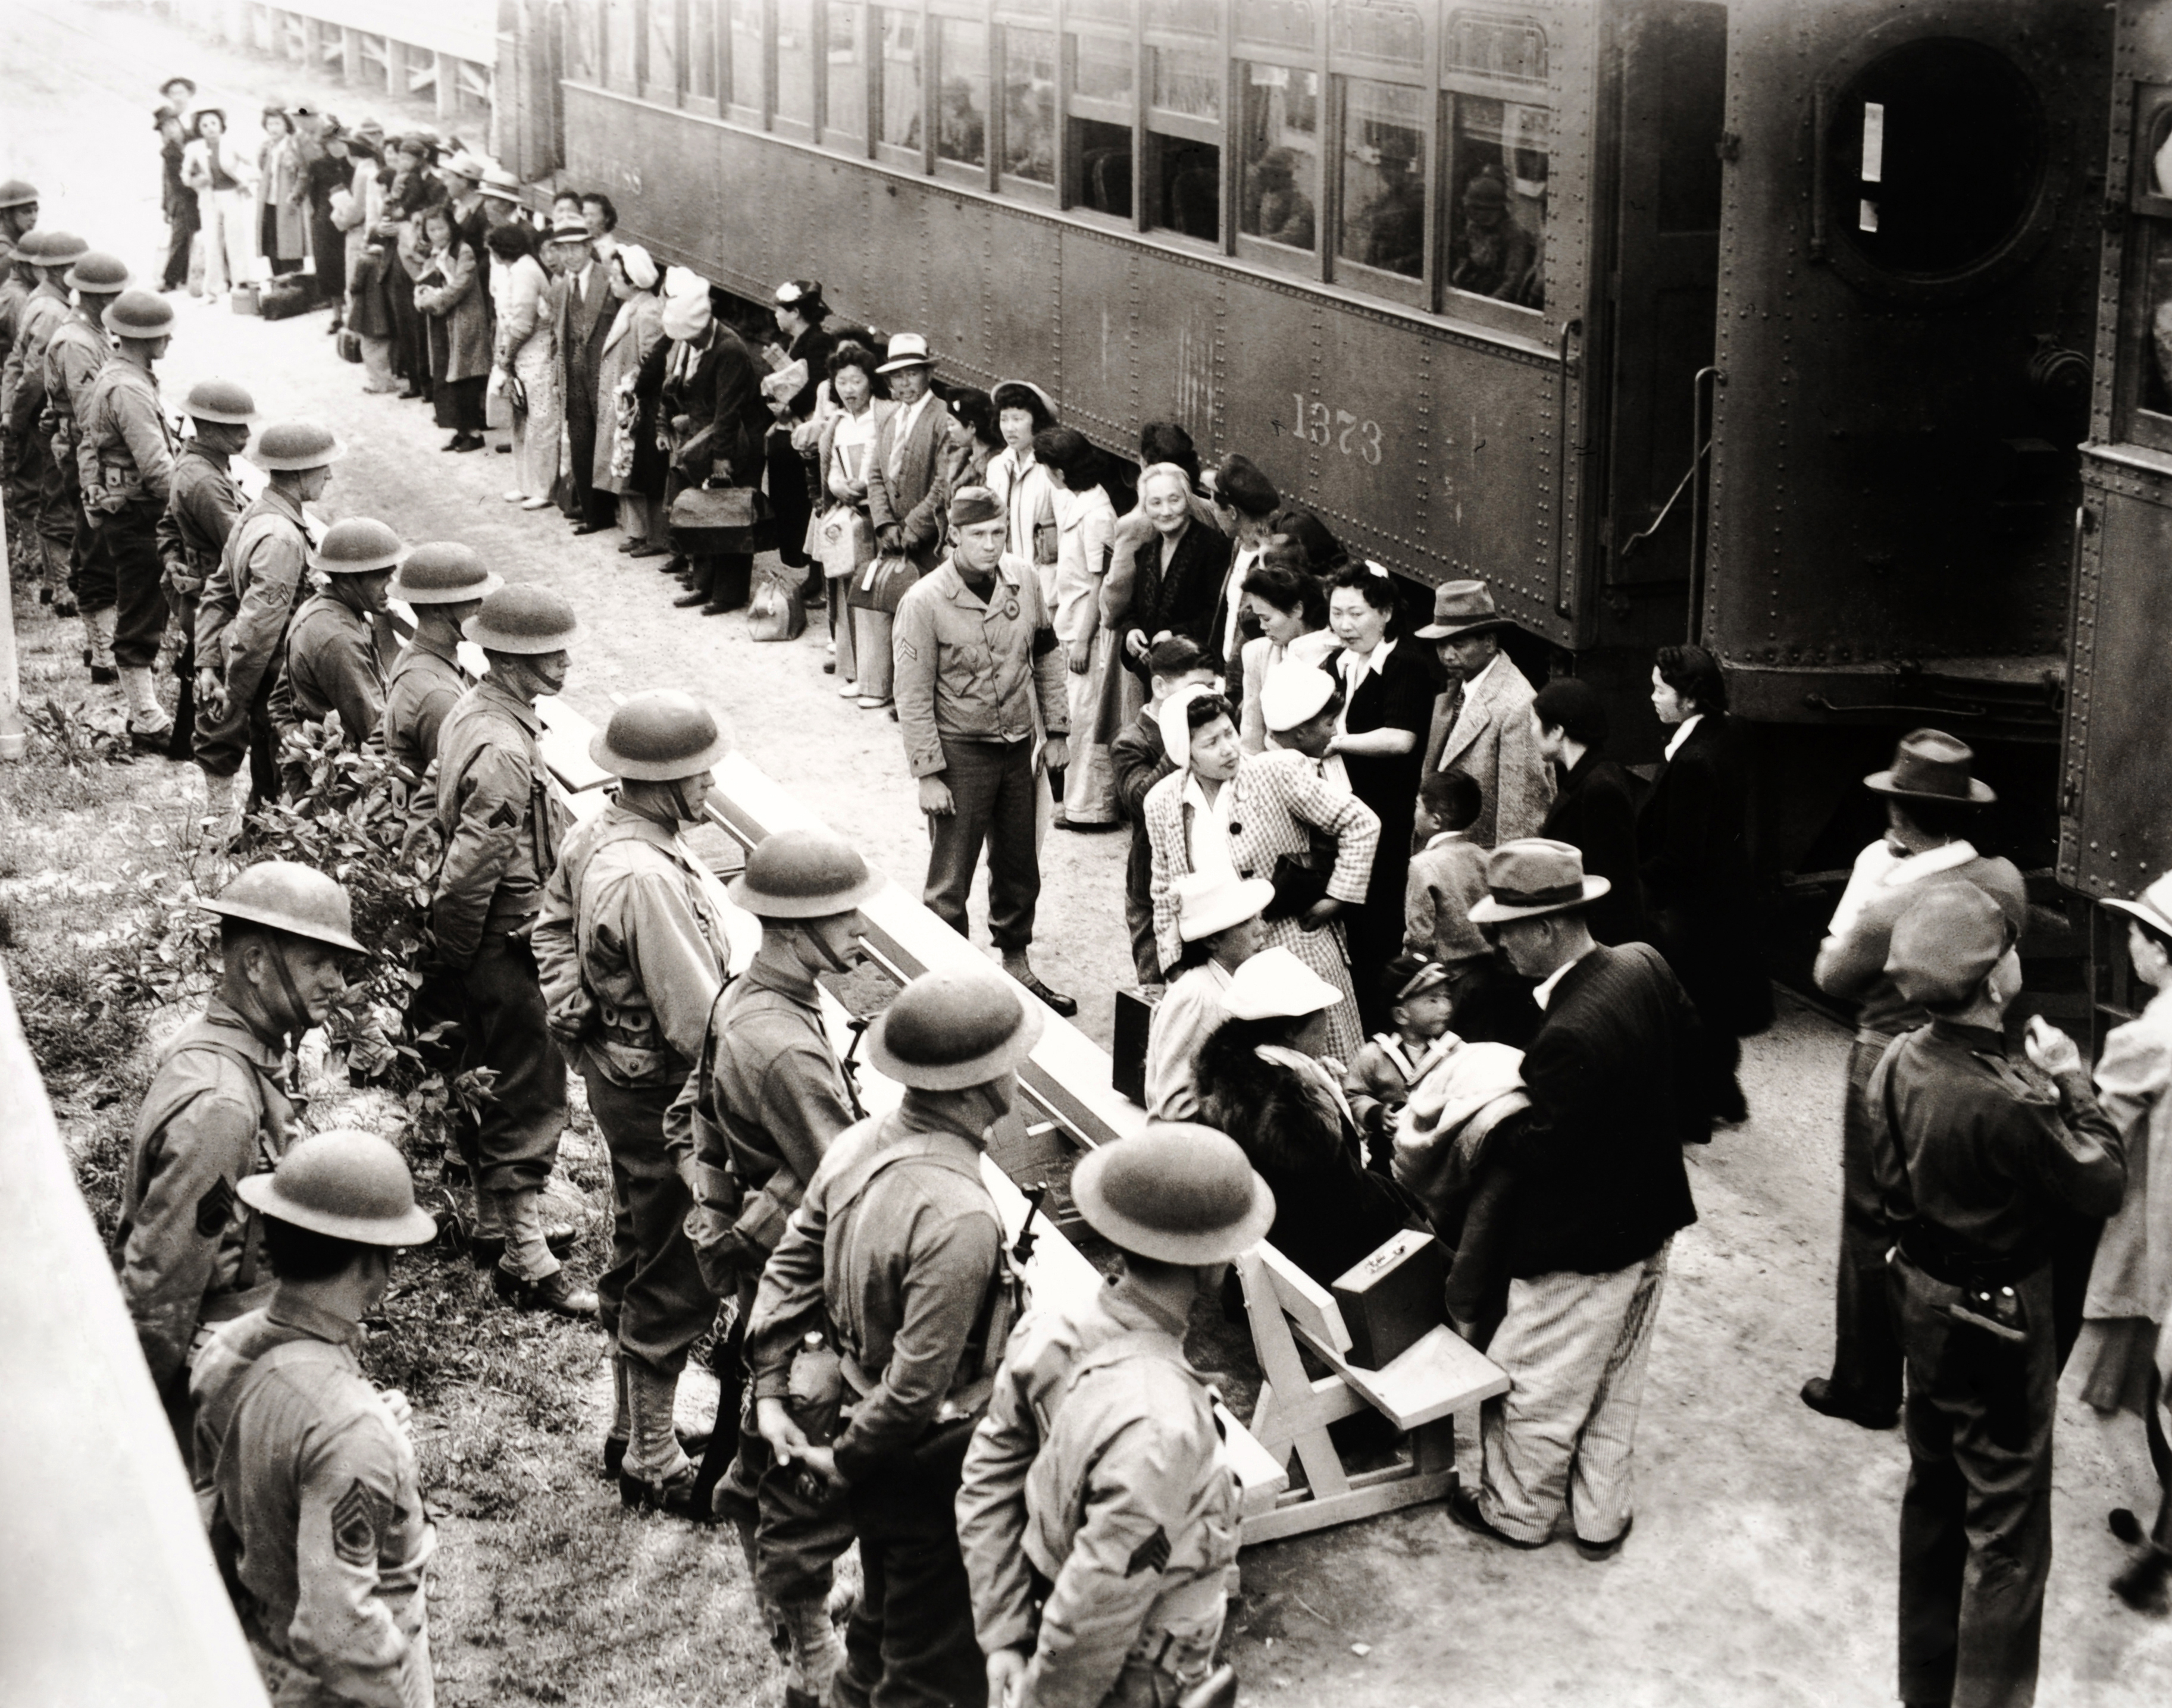 Japanese citizens of the United States en route to their internment at the Santa Anita racetrack, California during World War II, April 1942